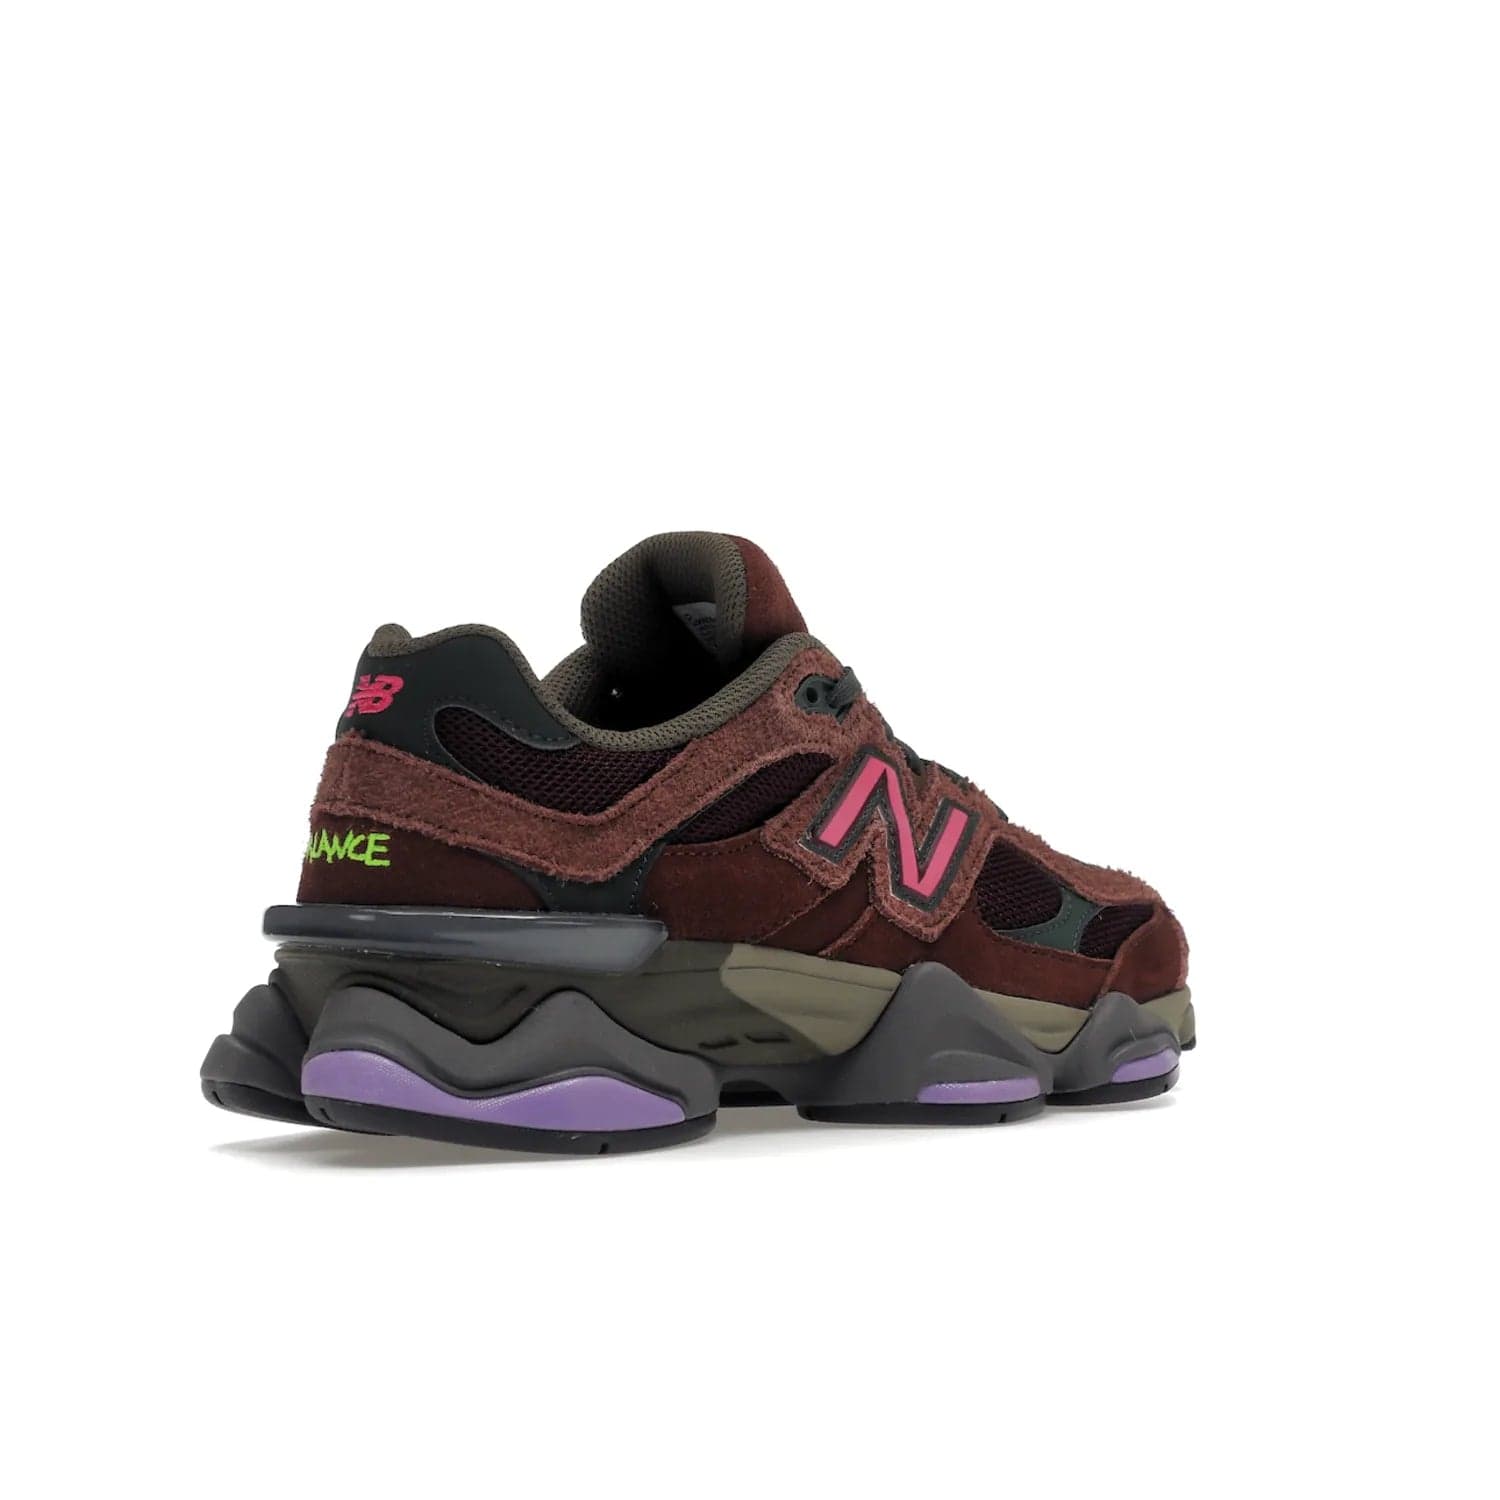 New Balance 9060 Rich Oak Burgundy - Image 33 - Only at www.BallersClubKickz.com - The New Balance 9060 is a stylish blend of performance and fashion. Featuring oak and burgundy hues, a durable upper, Fresh Foam cushioning and expanded rubber outsole, you’ll be looking and feeling great with every step. Available November 5th.